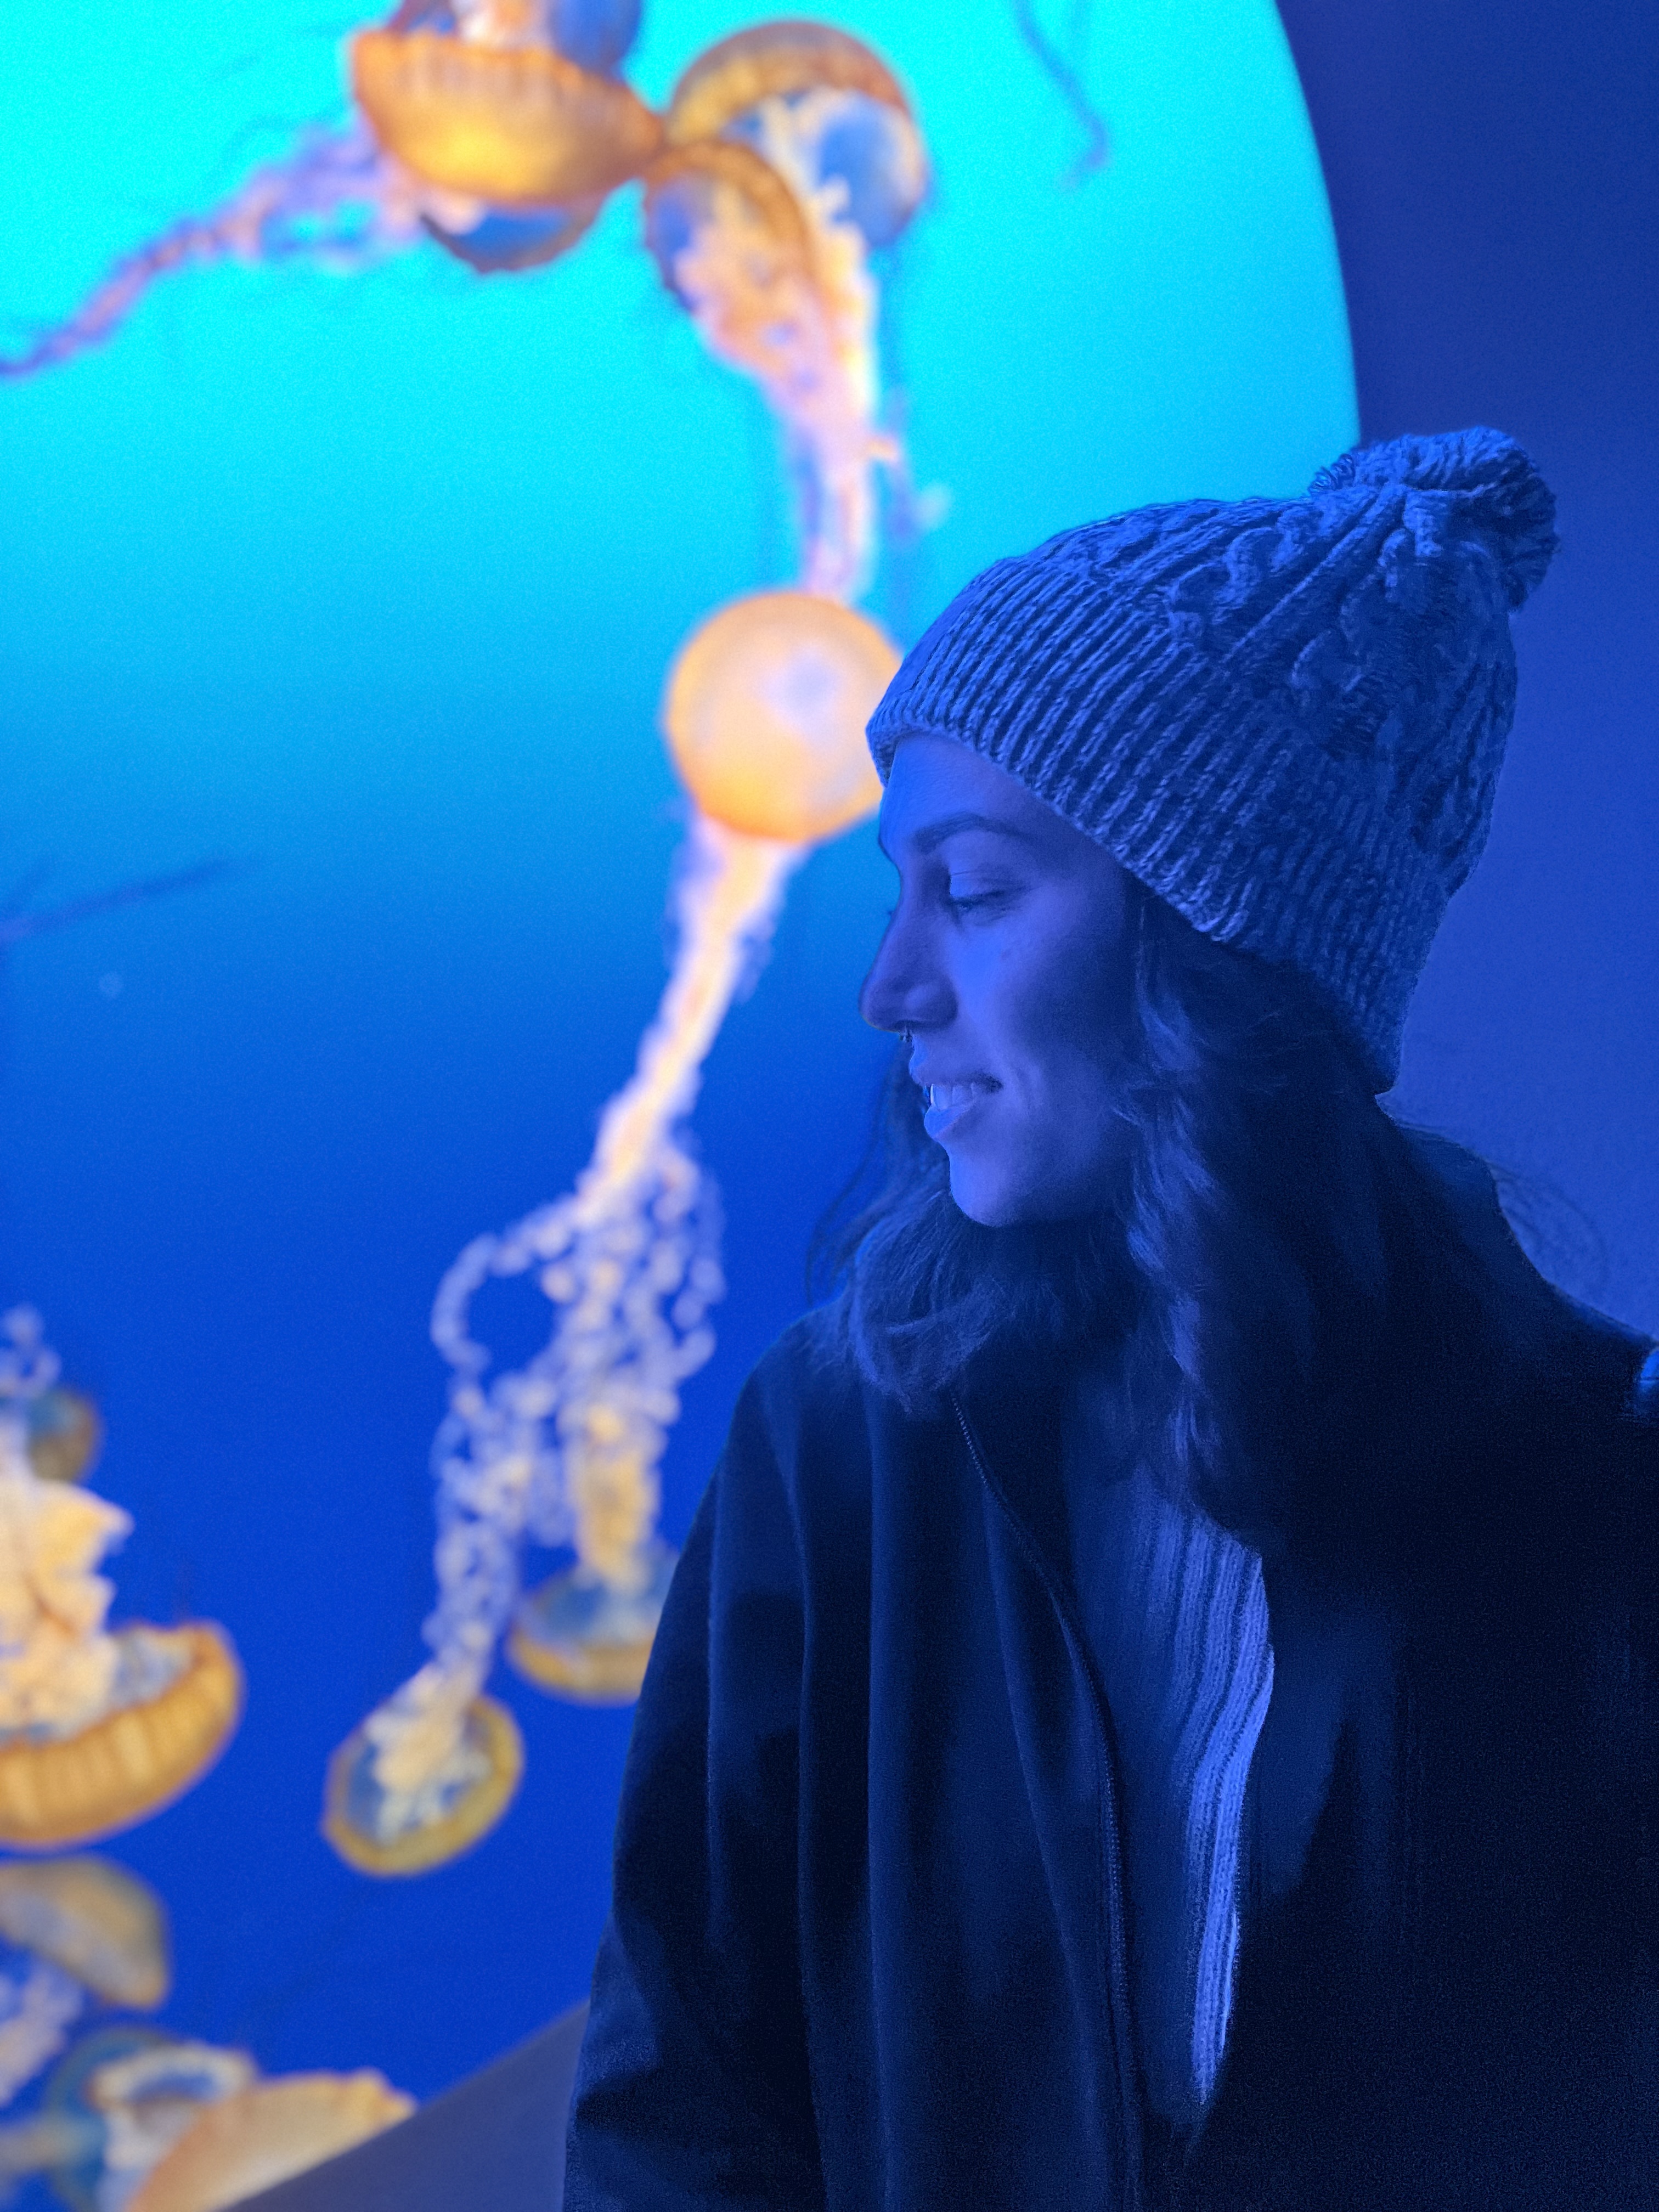 side profile of a white woman with long hair and a hat, standing in front of an aquarium exhibit in blue lighting